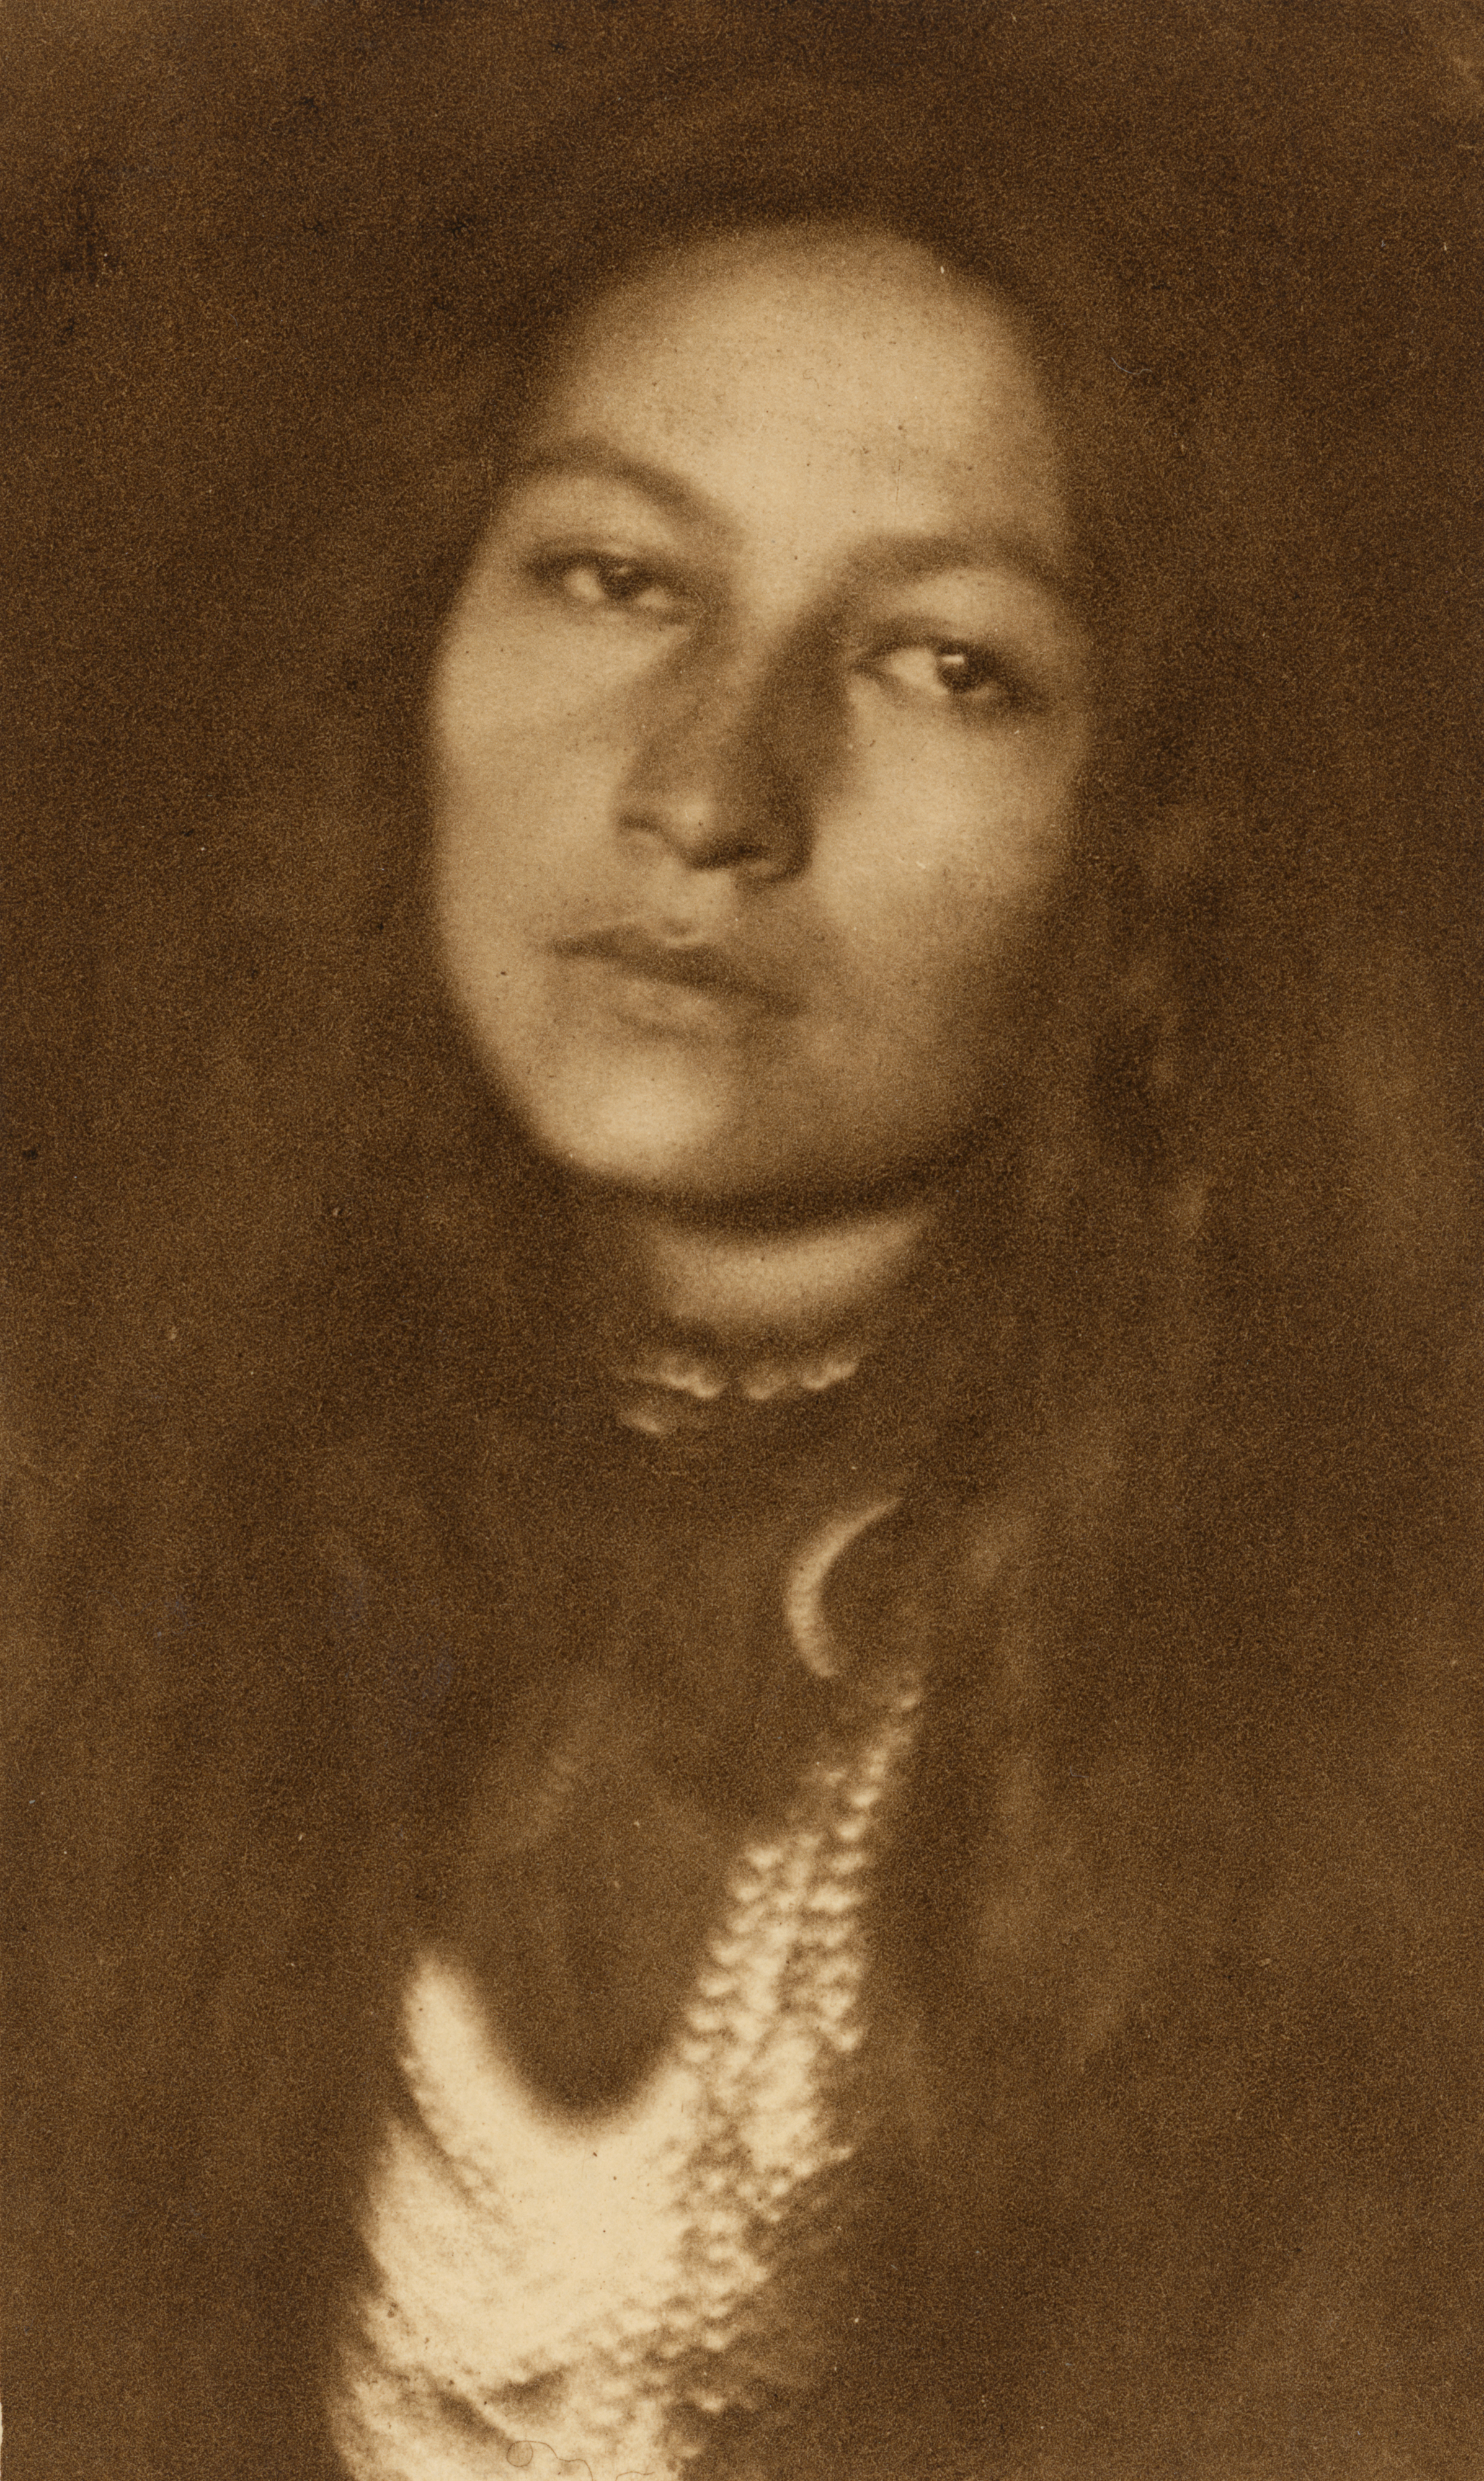 "Zitkala-sa" by Joseph T. Keiley, 1898 (printed 1901). (National Portrait Gallery, Smithsonian Institution)